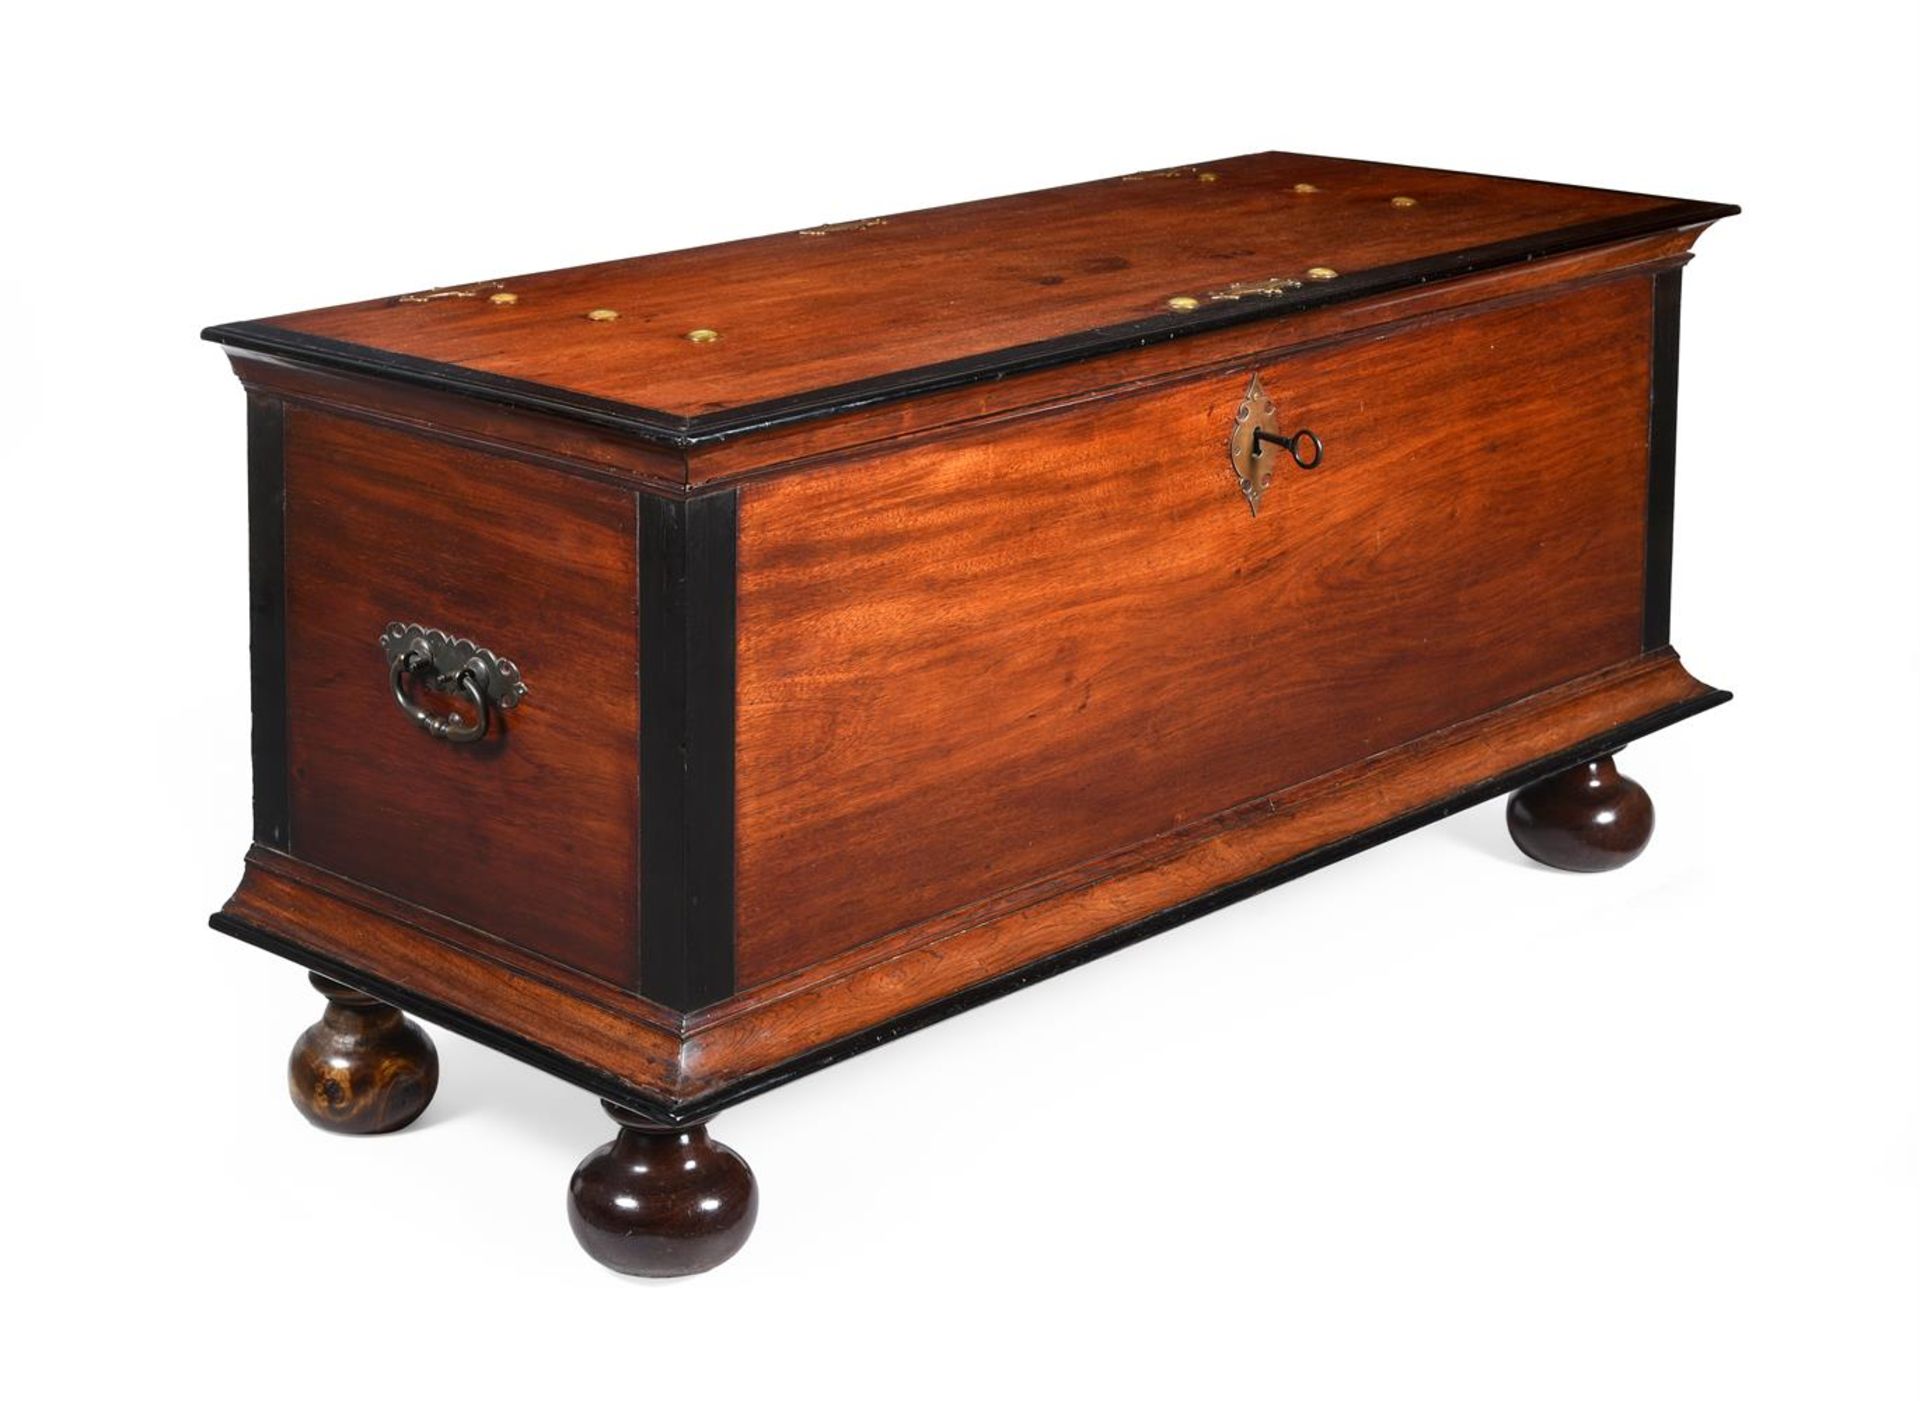 Y A DUTCH EAST INDIES EBONY AND JACKWOOD CHEST OR COFFER, POSSIBLY CAPE, EARLY 18TH CENTURY